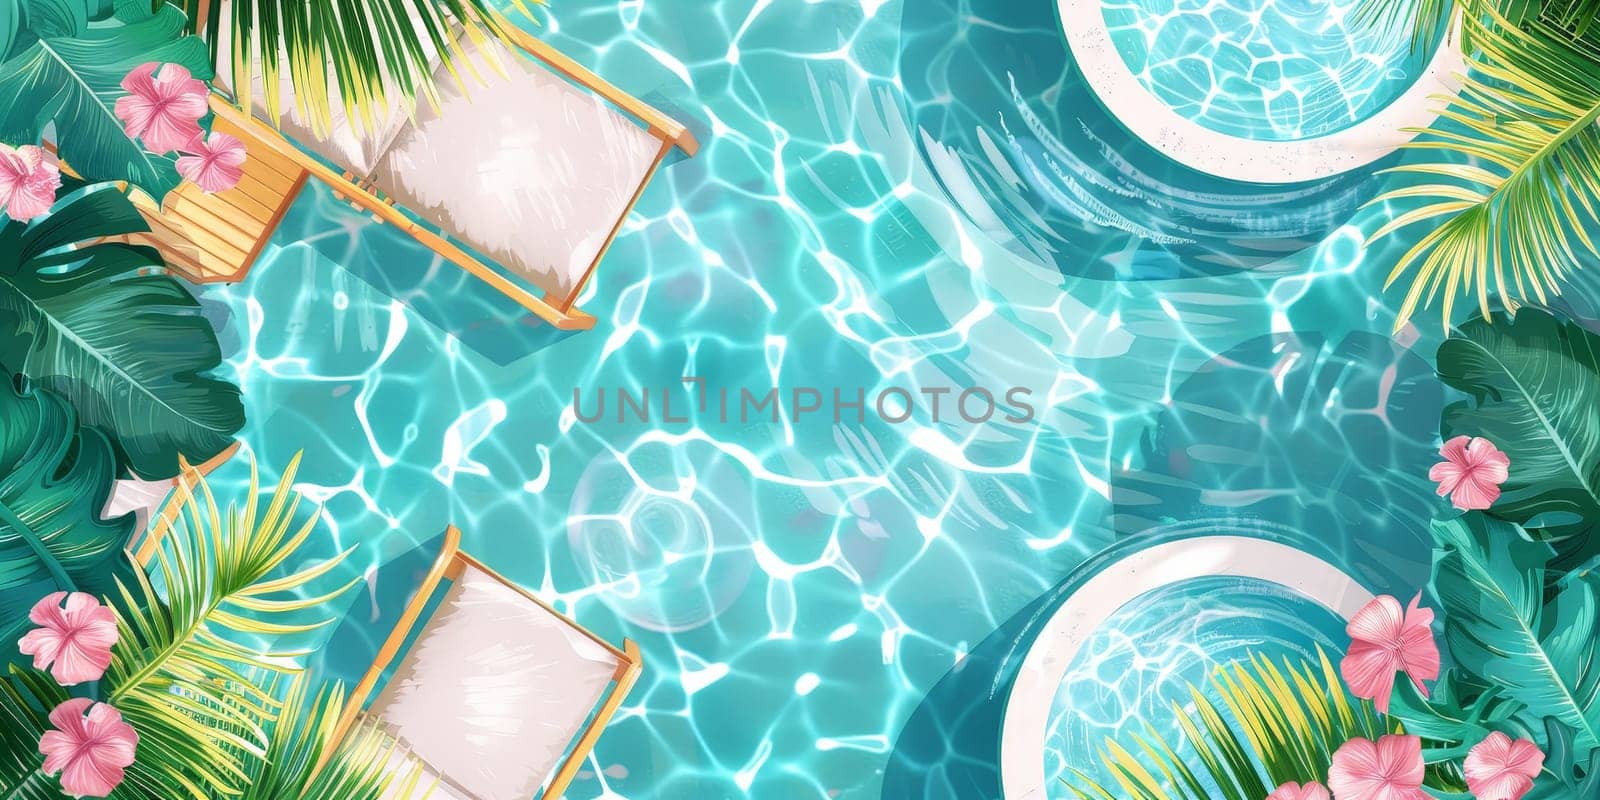 A tropical pool with two lounge chairs and a small pool with pink flowers. Scene is relaxing and serene